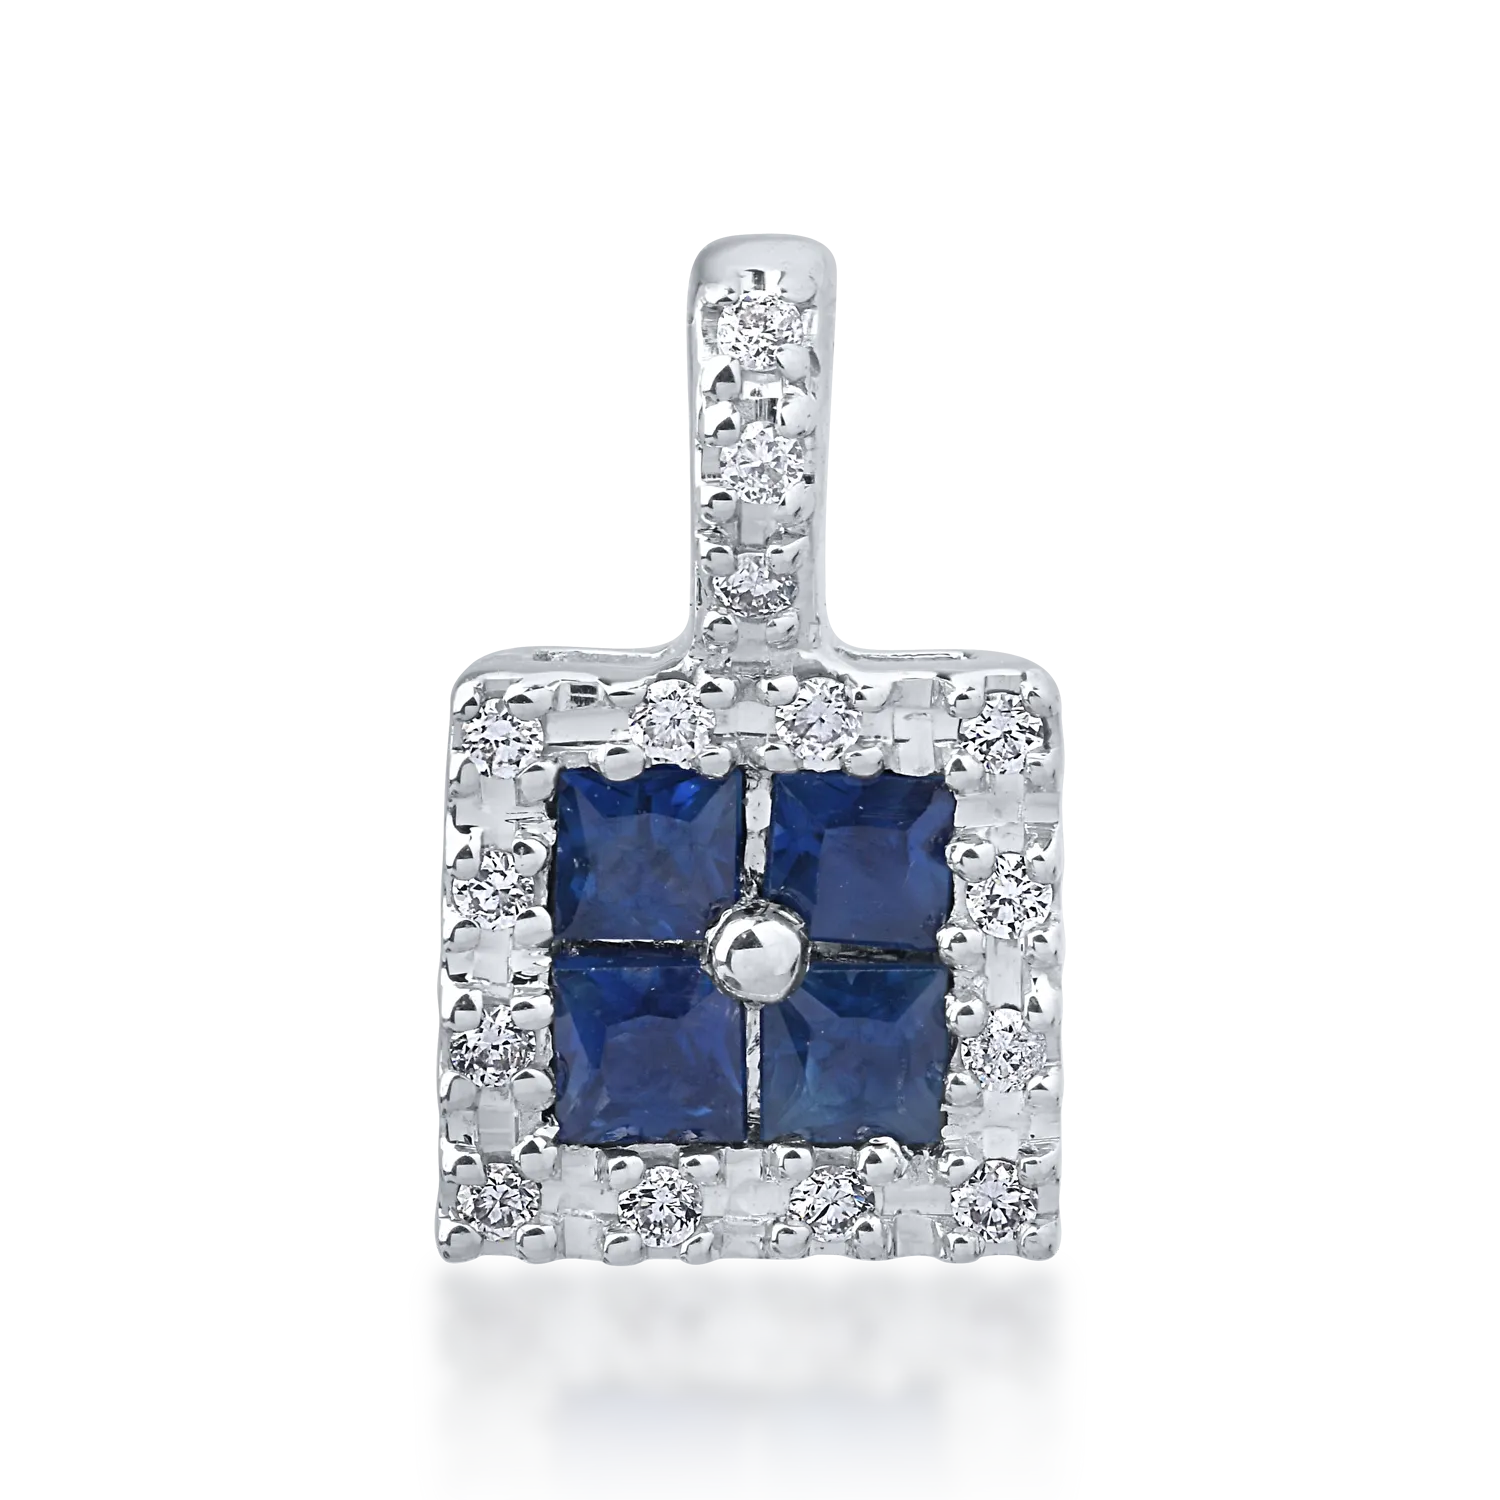 18K white gold pendant with 0.24ct sapphires and 0.06ct diamonds